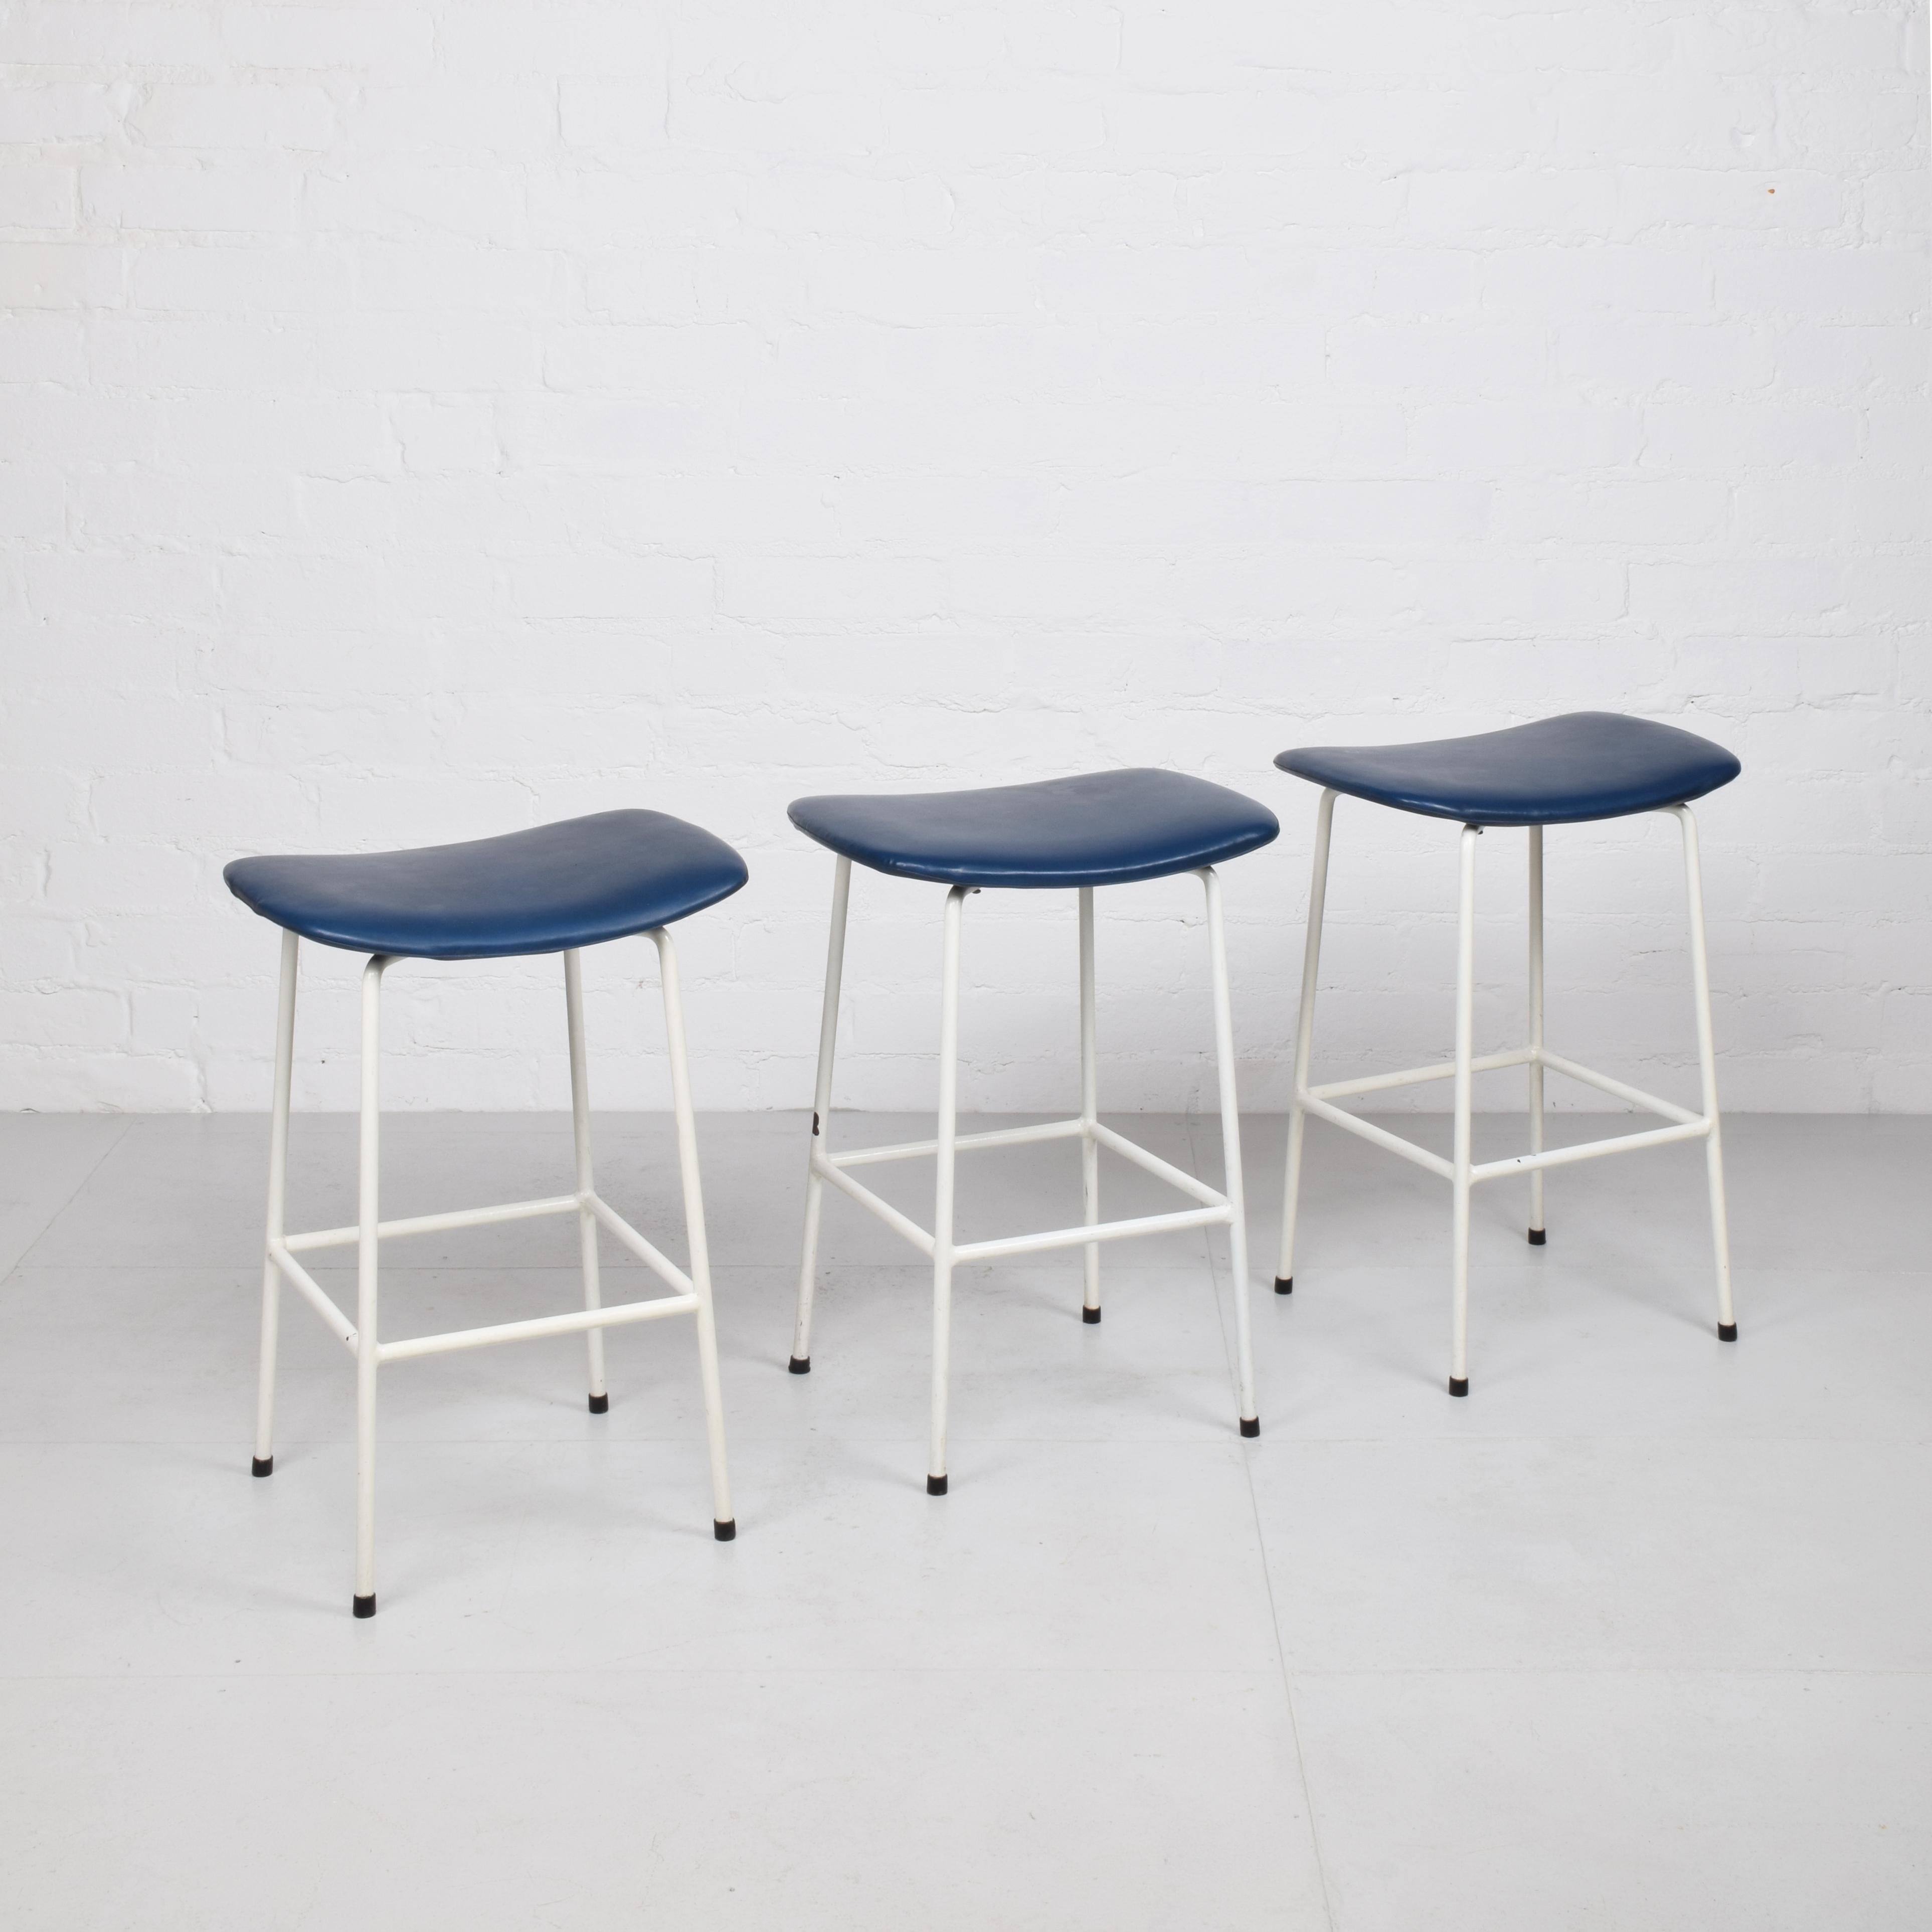 Frank Guille for Kandya
Set of 3 ‘Program’ stools, 1958
(Low version, 51 cm seat height)
 
White powder coated steel frames, vinyl upholstery on moulded plywood seats. Labels to undersides.
 
Good original condition. Some small areas of